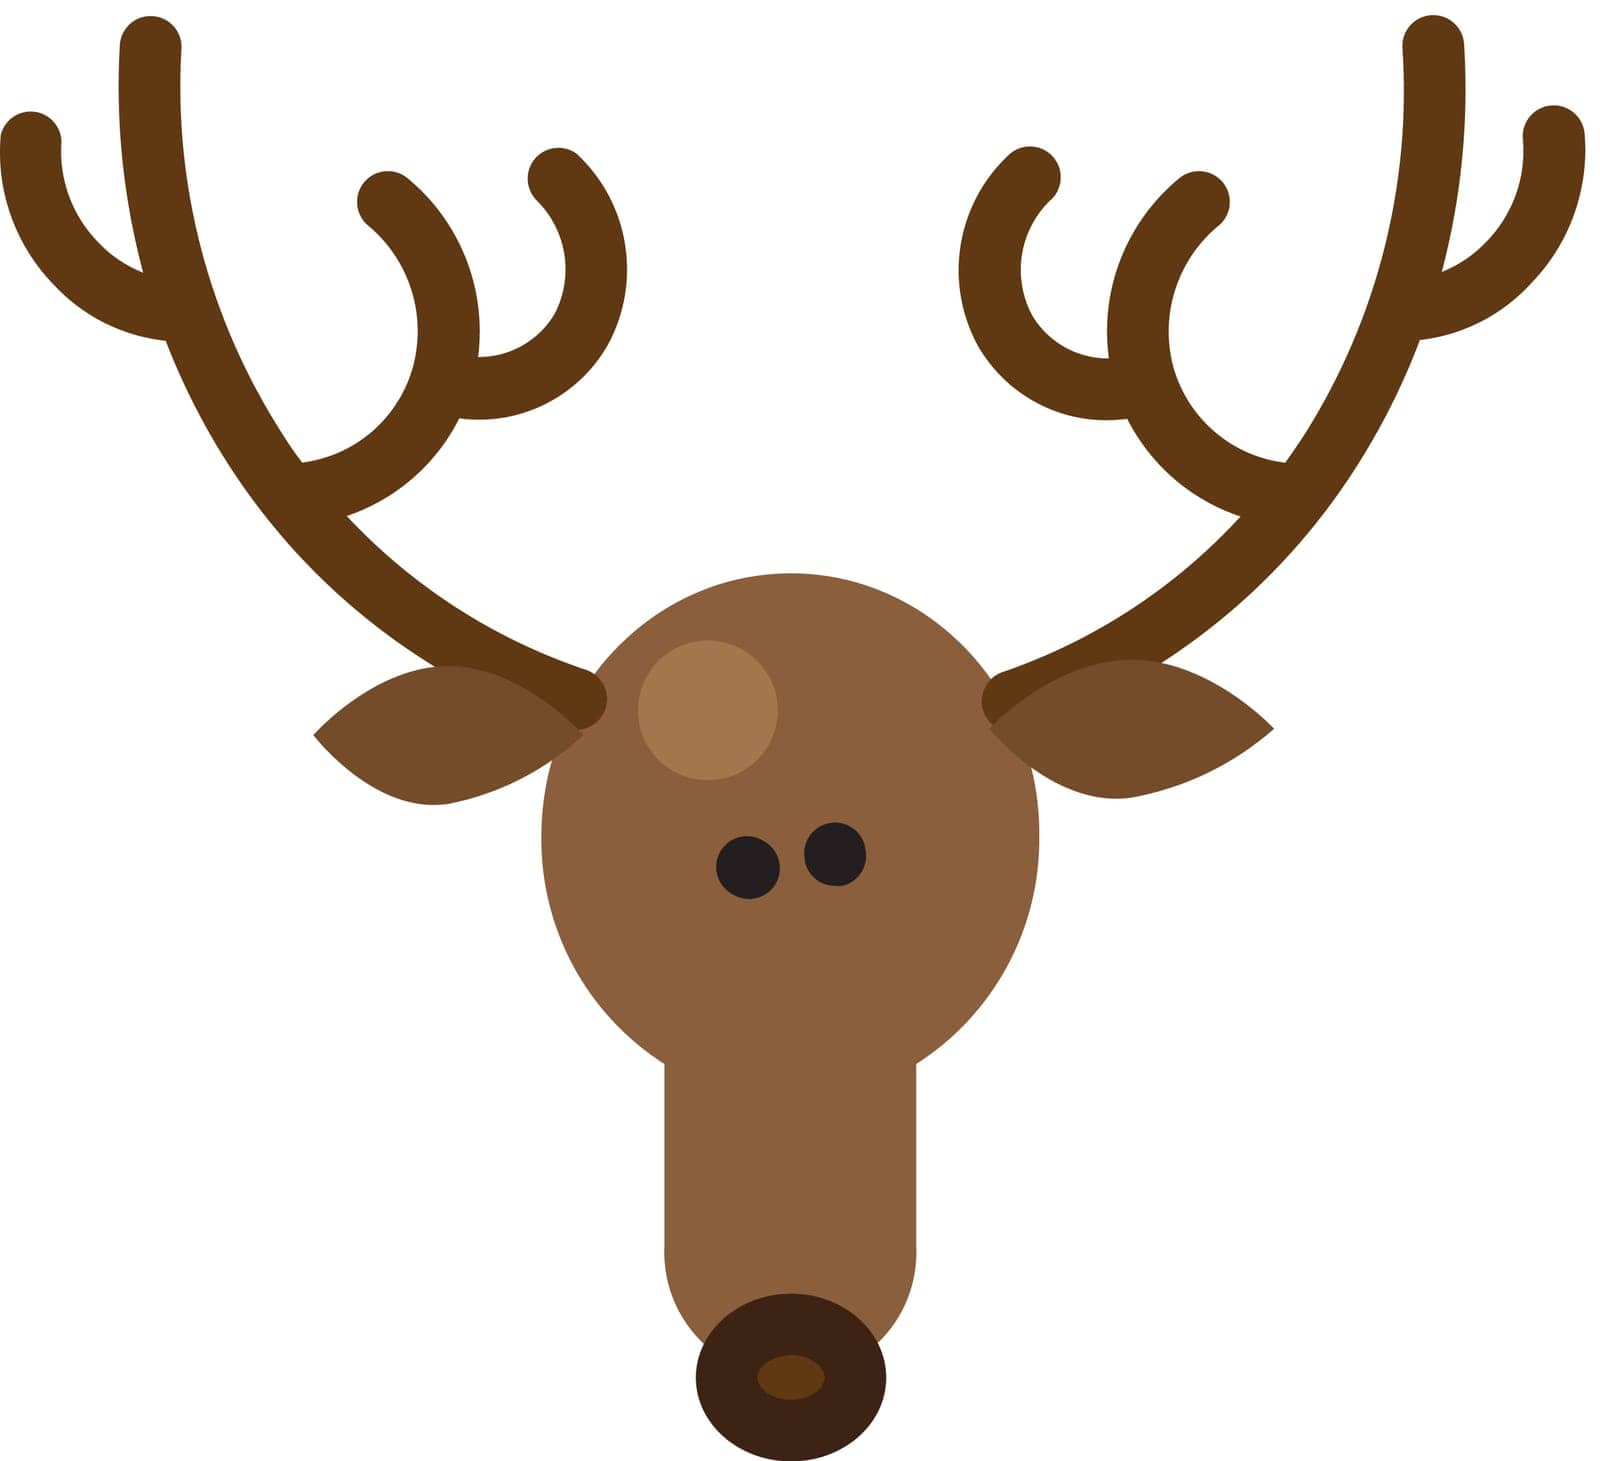 Deer santa claus animal for moving sleigh vector. Reindeer muzzle with antlers, mammal for transportation presents in winter seasonal christmas holiday. Xmas flat cartoon illustration